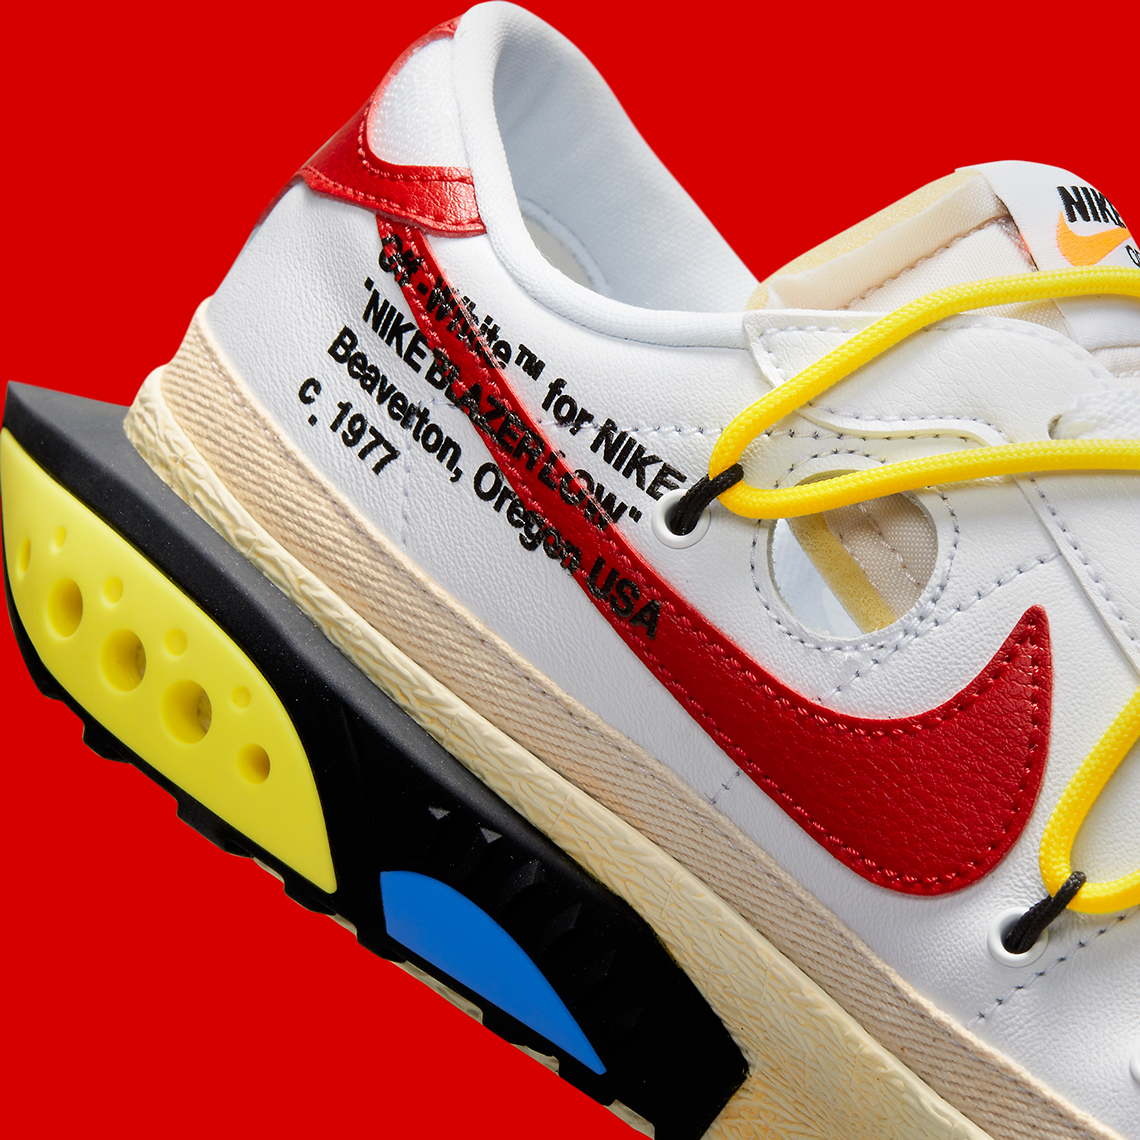 off white nike vulc blazer low white red dh7863 100 release date 8